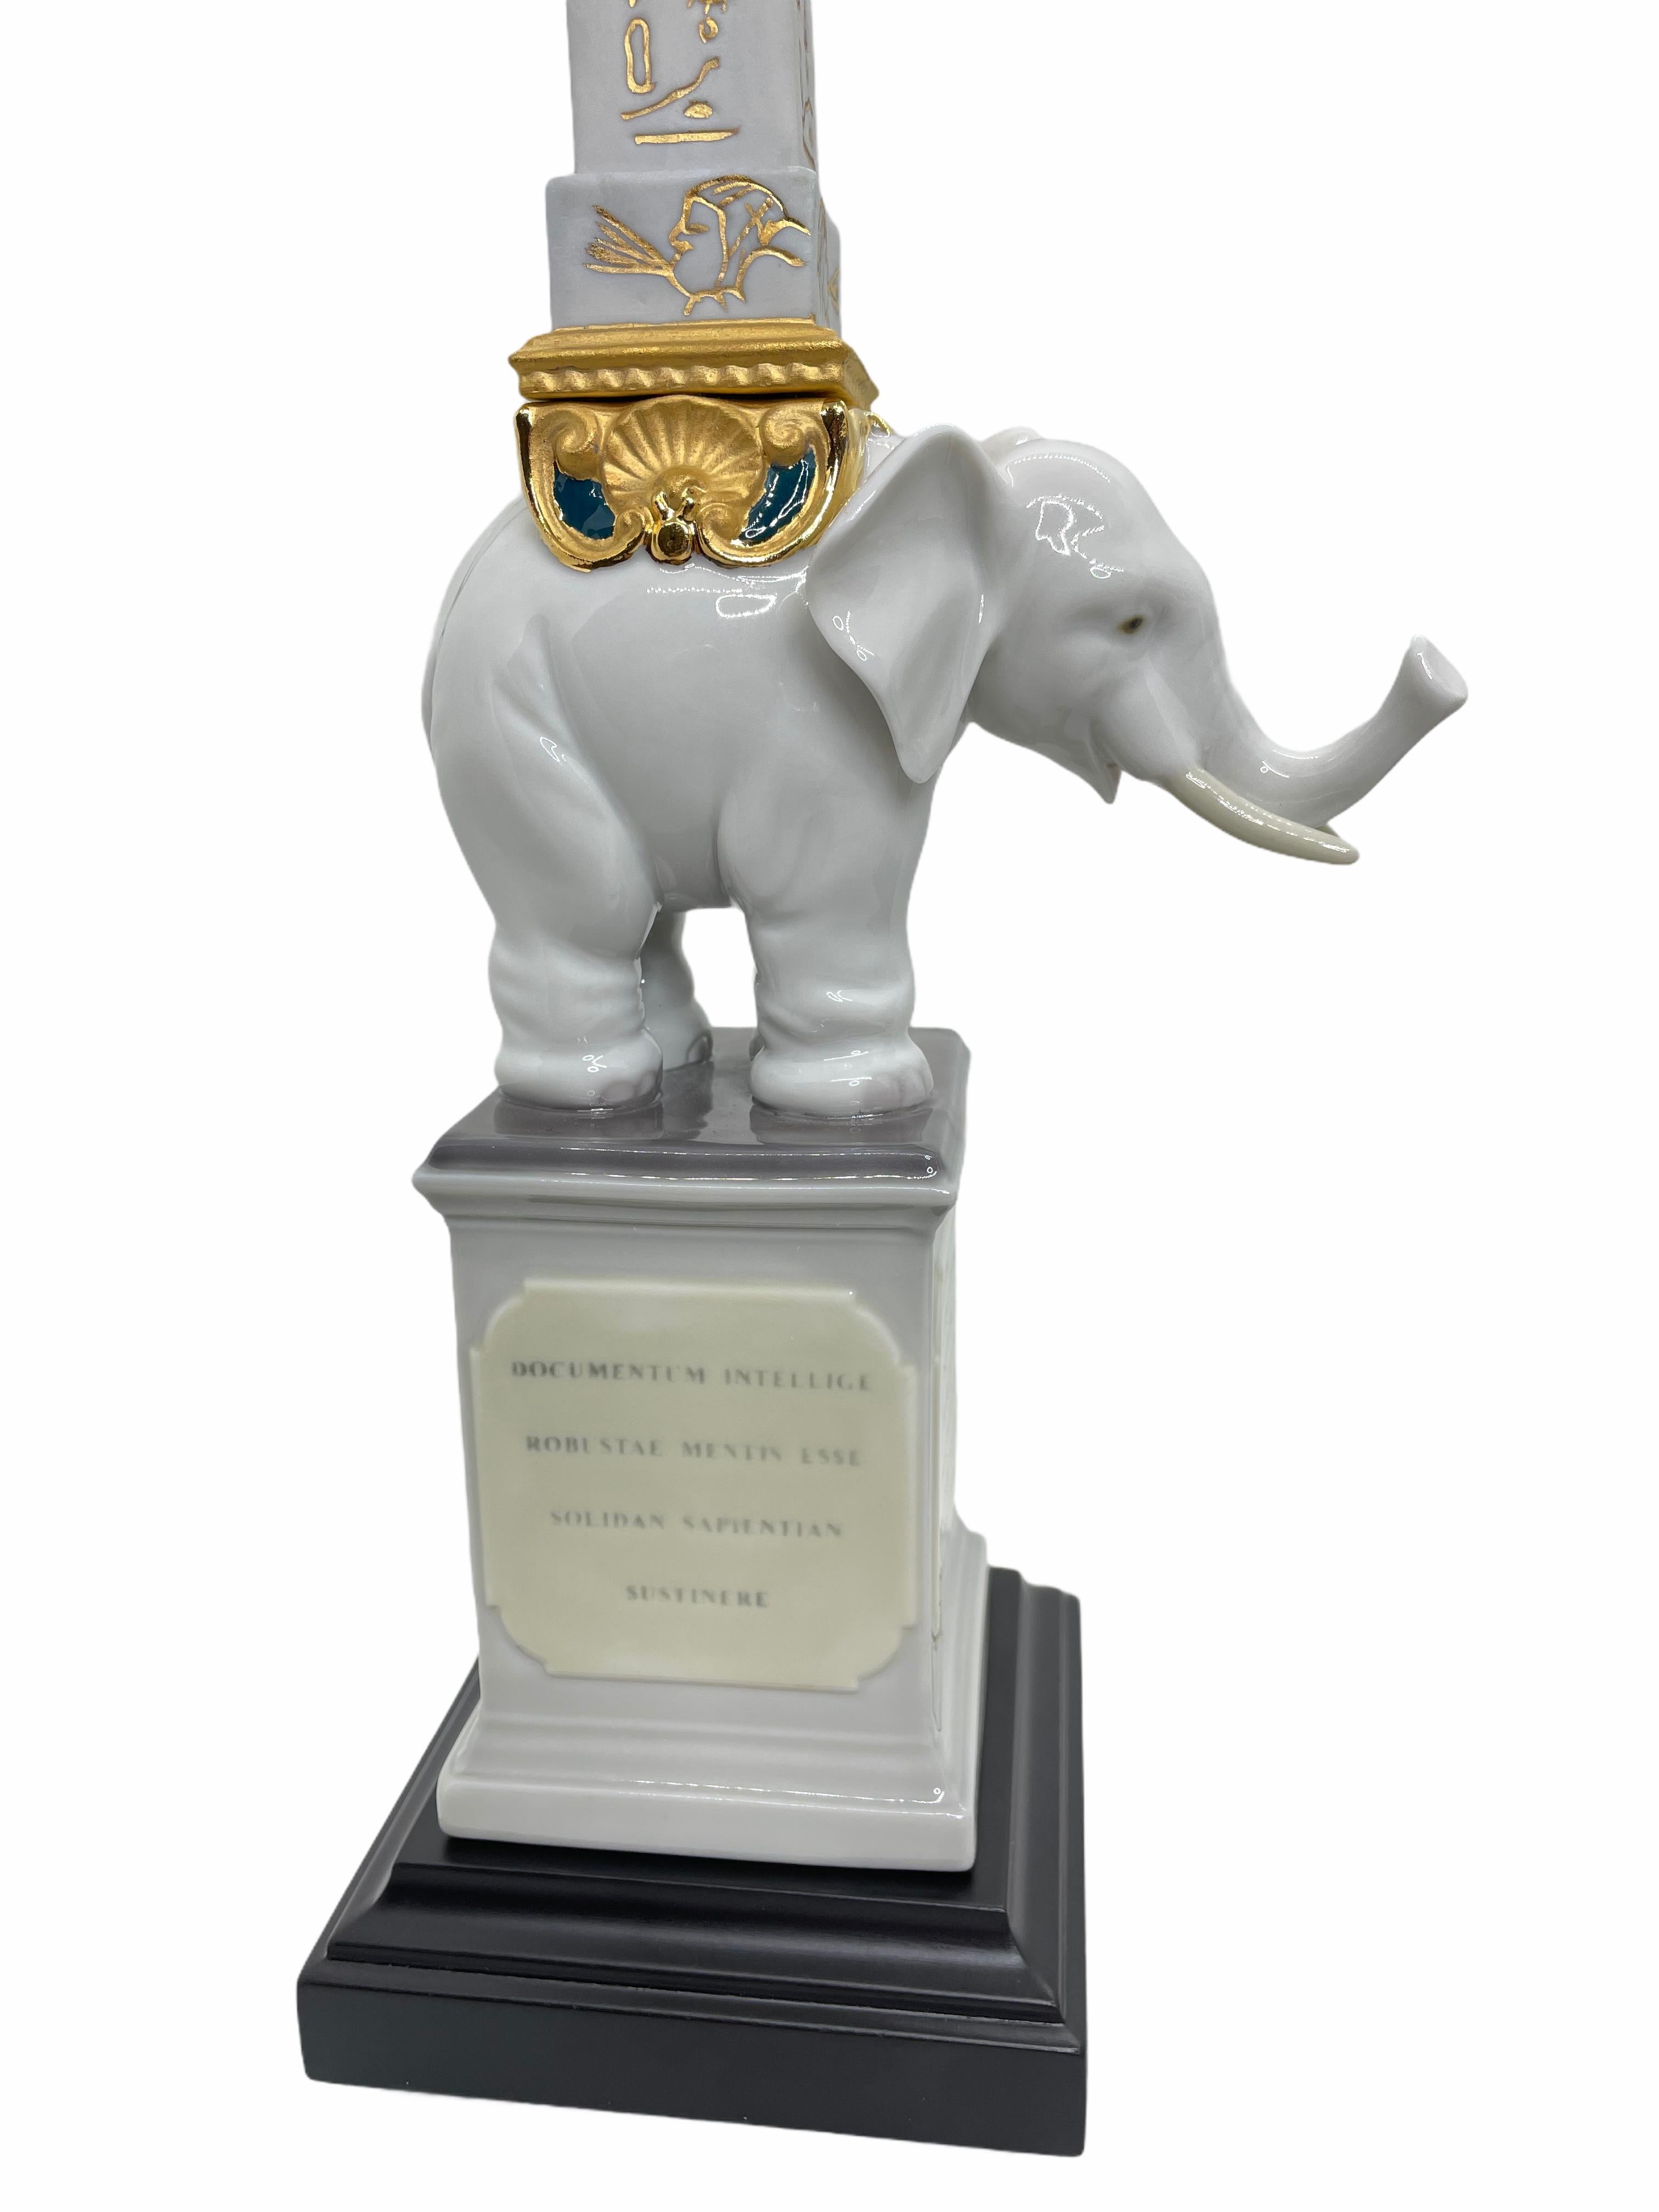 Pulcino obelisk porcelain elephant figurine designed by Sculptor Francisco Cuesta at Lladro Porcelain, Spain. The Lladro Figurines are hand crafted by artisans based in the “City of Porcelain” in Valencia, Spain. They use the finest porcelain